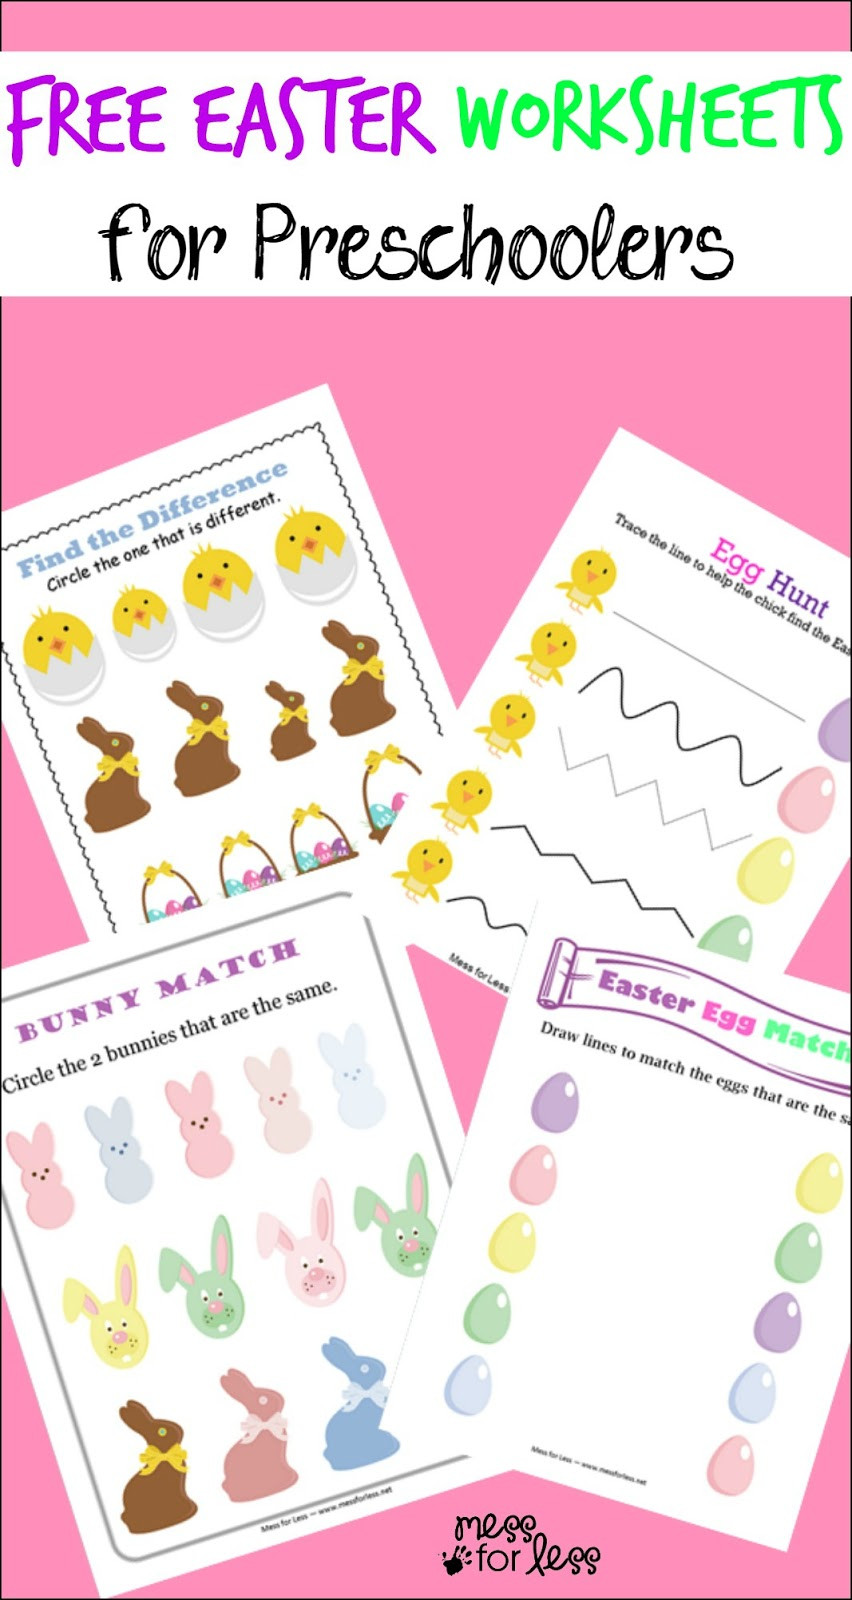 Free Crafts For Preschoolers
 Free Easter Preschool Worksheets Mess for Less